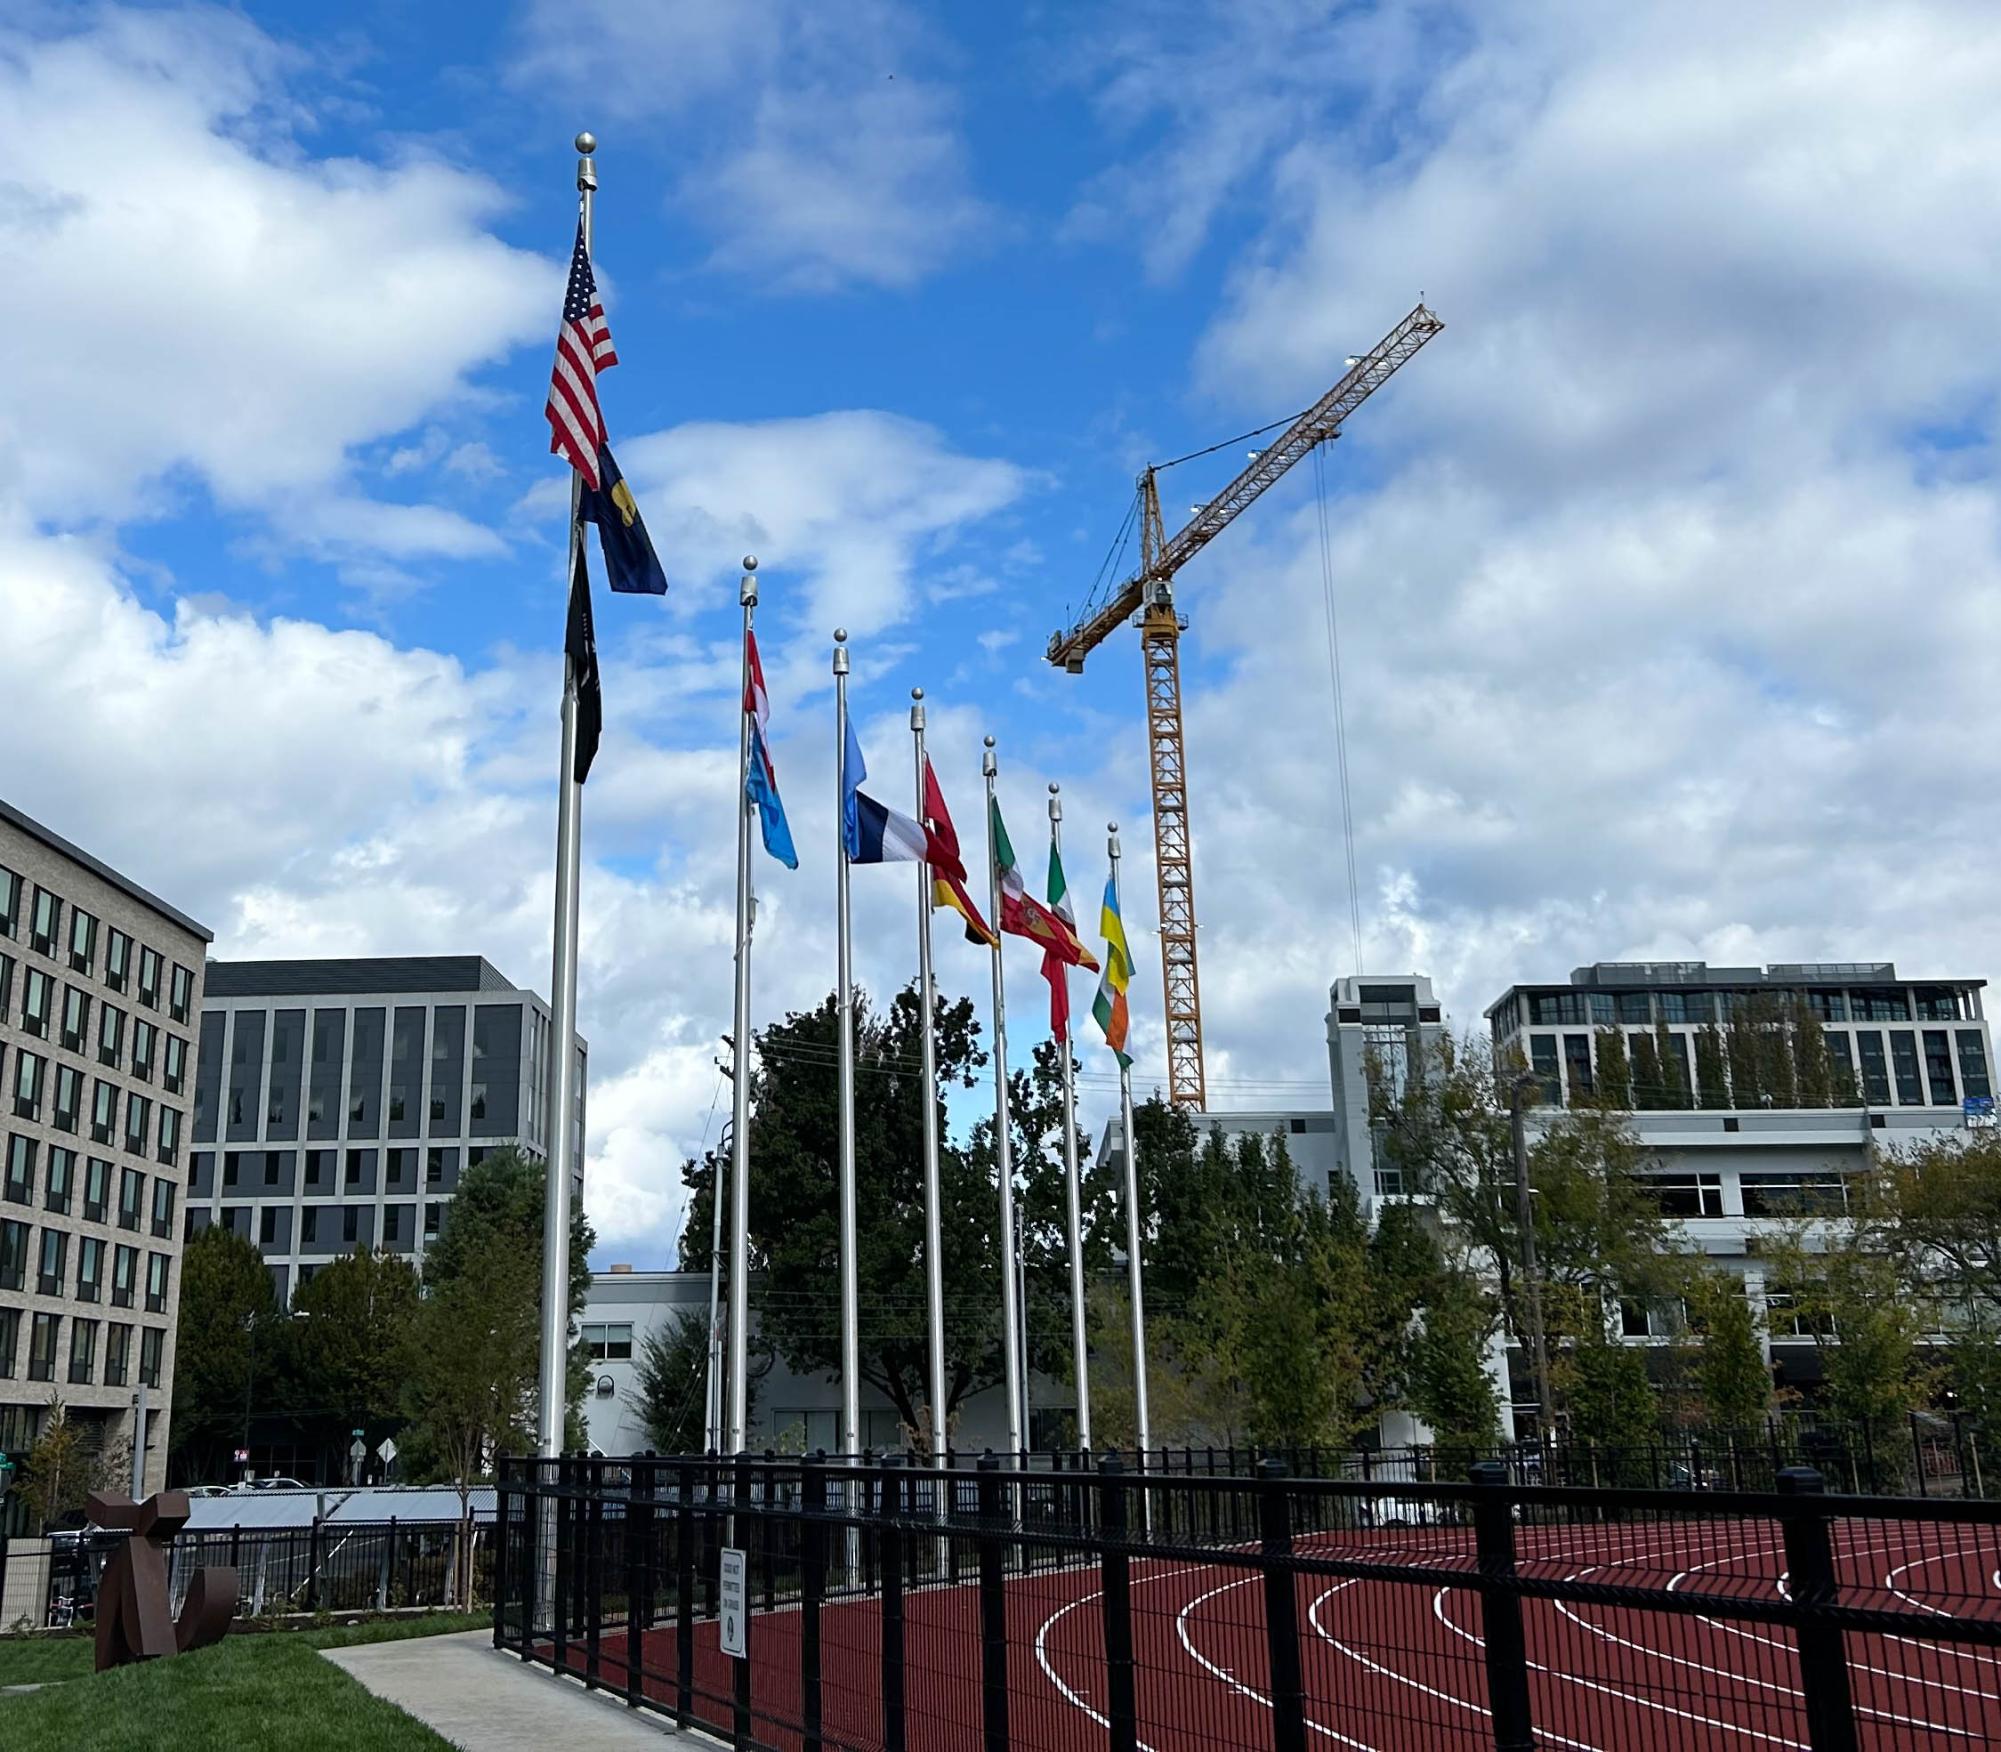 The U.S., Oregon, and POW MIA (Prisoner of War Missing In Action) flags fly on Lincoln’s tallest flagpole. Two flags have been put up on each of the smaller poles, featuring flags from various countries.